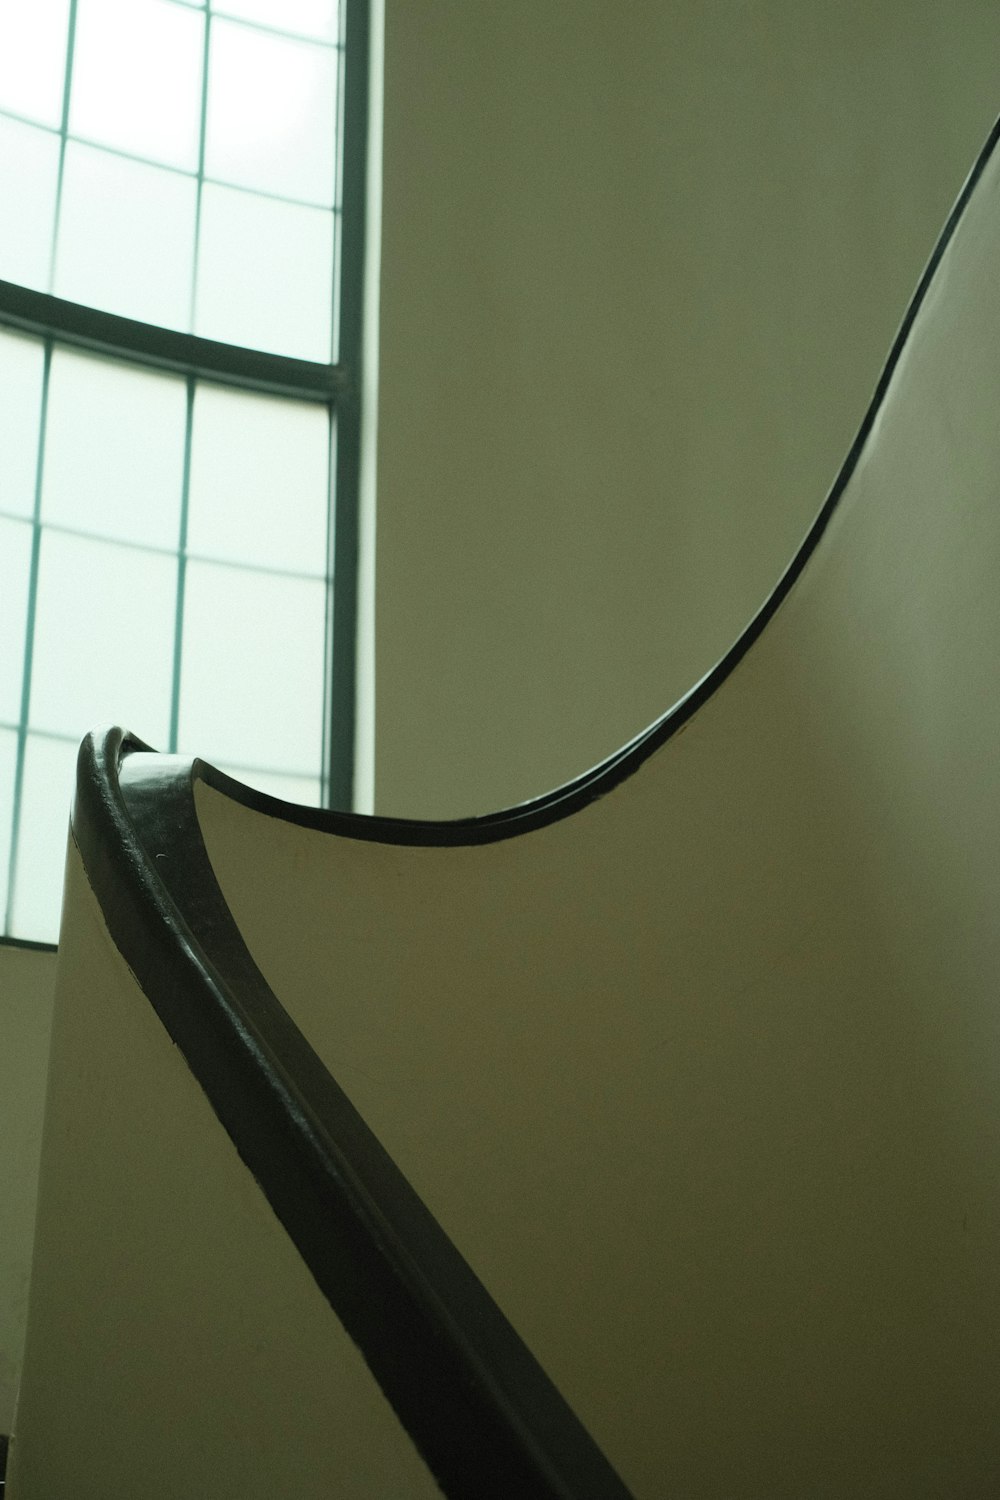 a close up of a curved metal object near a window